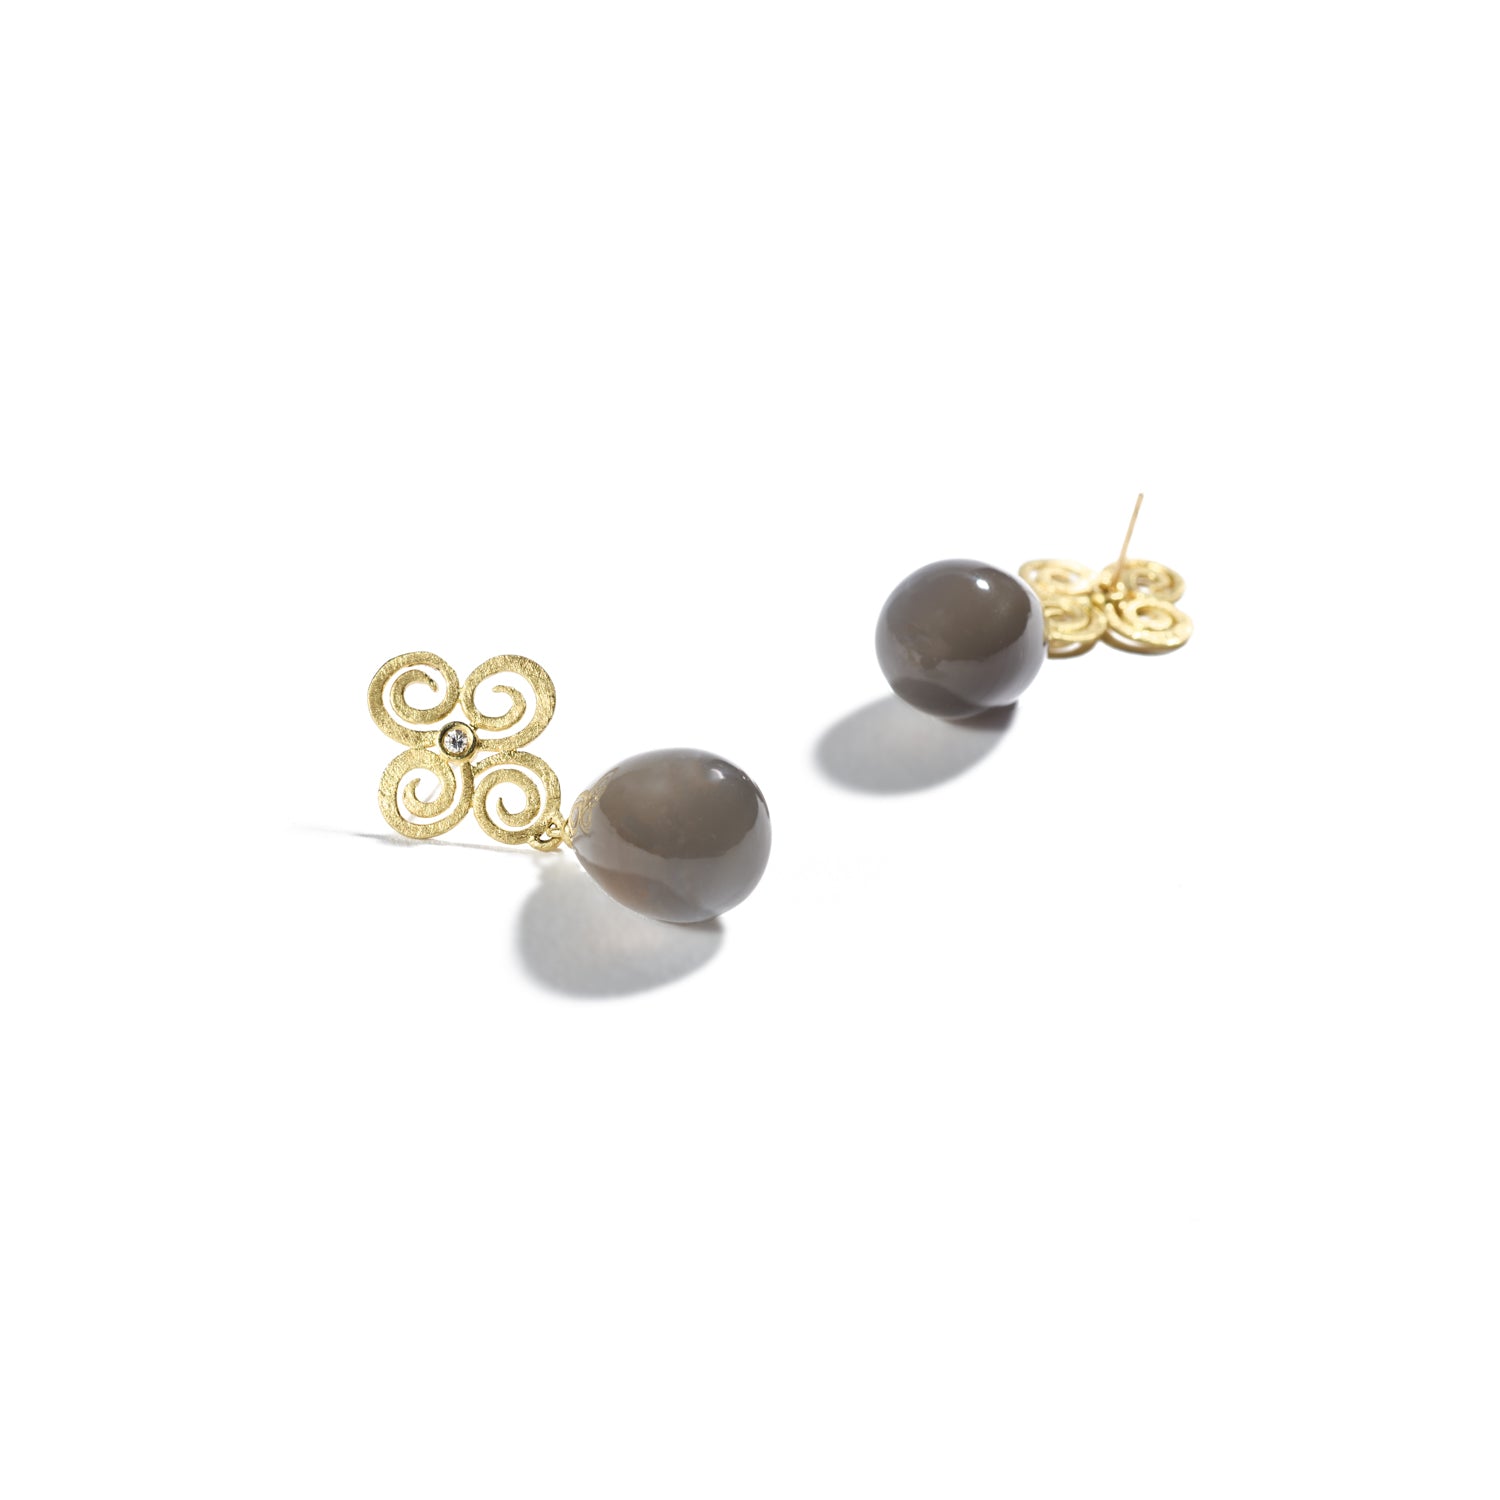 Gold and Pear Shaped Moonstone Earrings